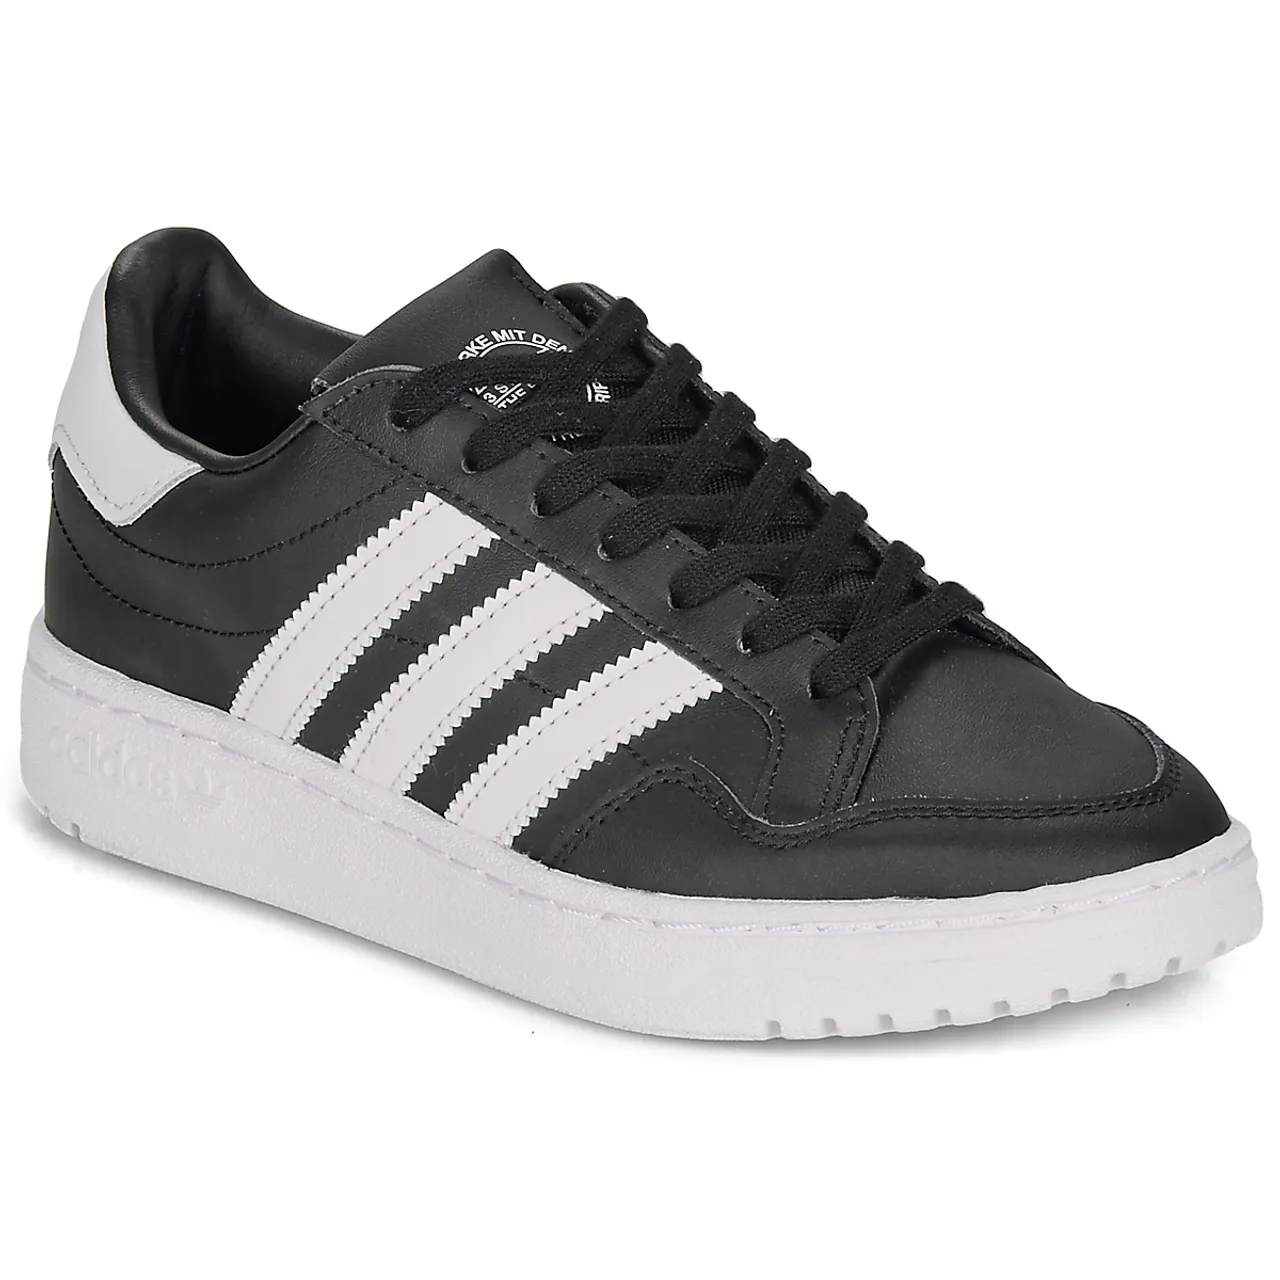 adidas  Novice J  boys's Children's Shoes (Trainers) in Black